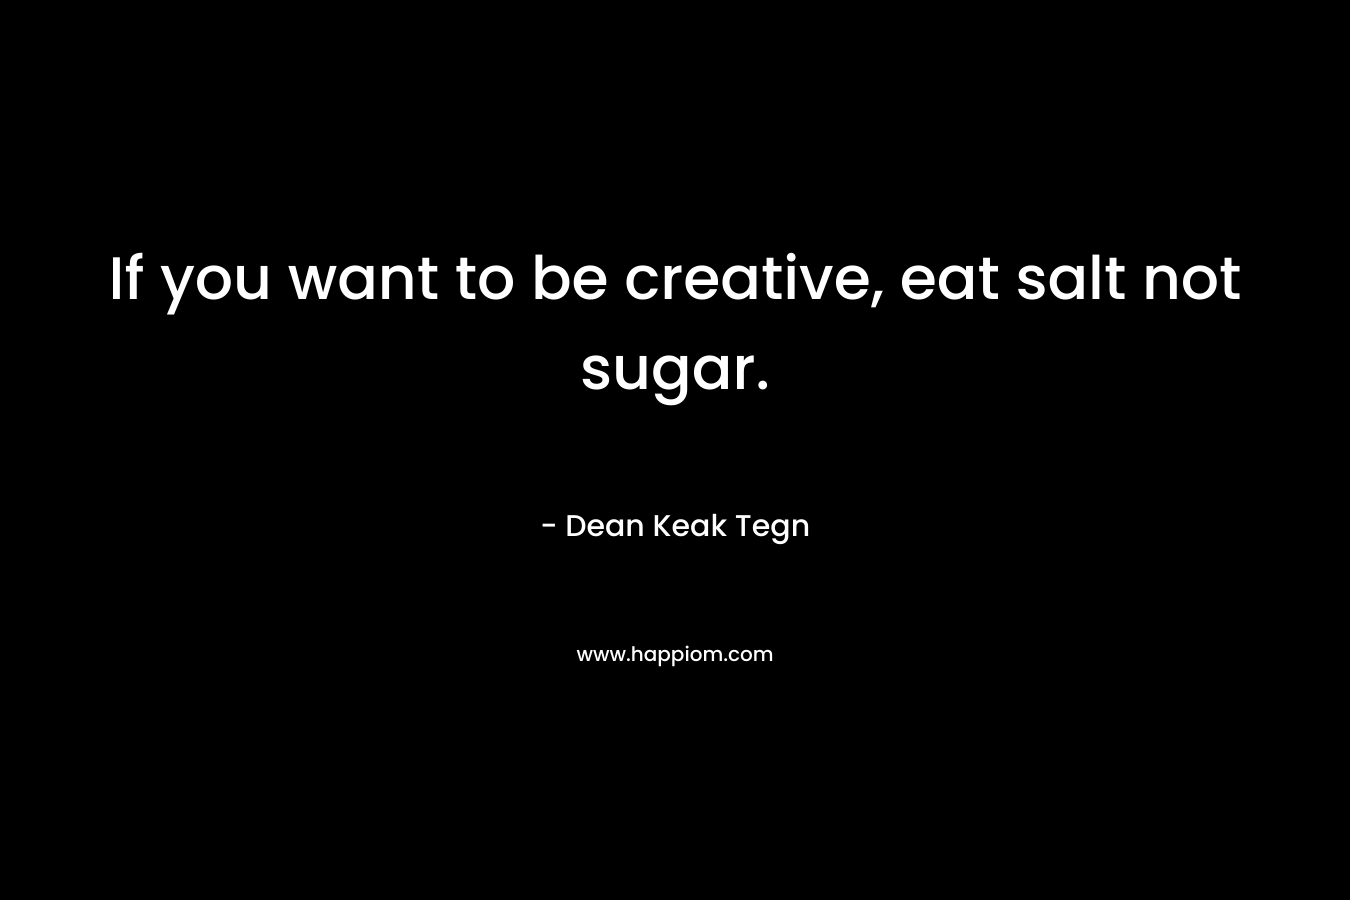 If you want to be creative, eat salt not sugar.